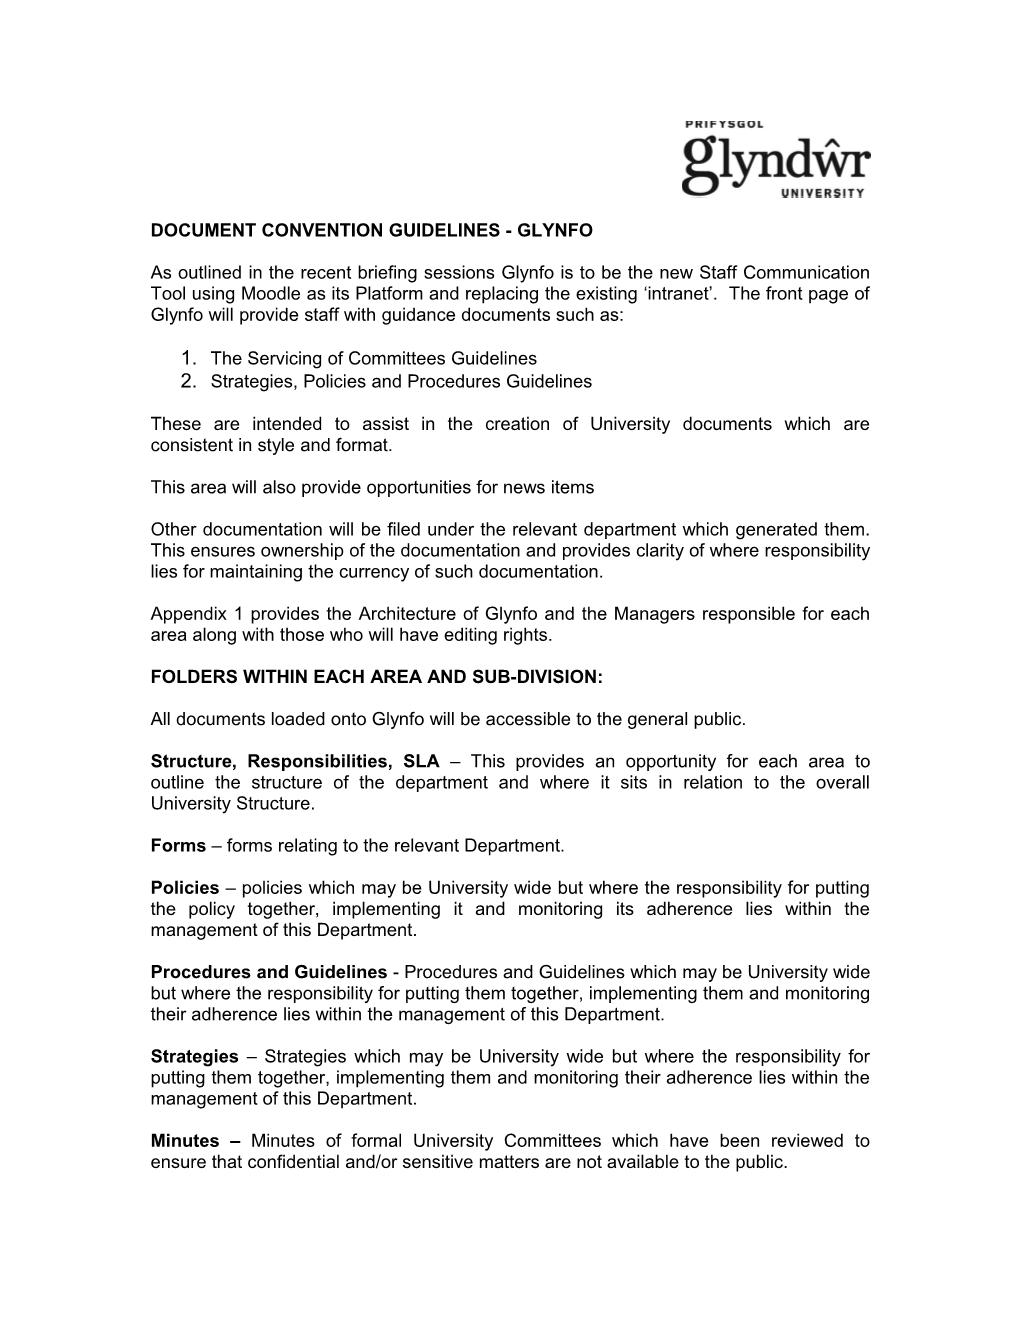 Document Convention Guidelines - Glynfo